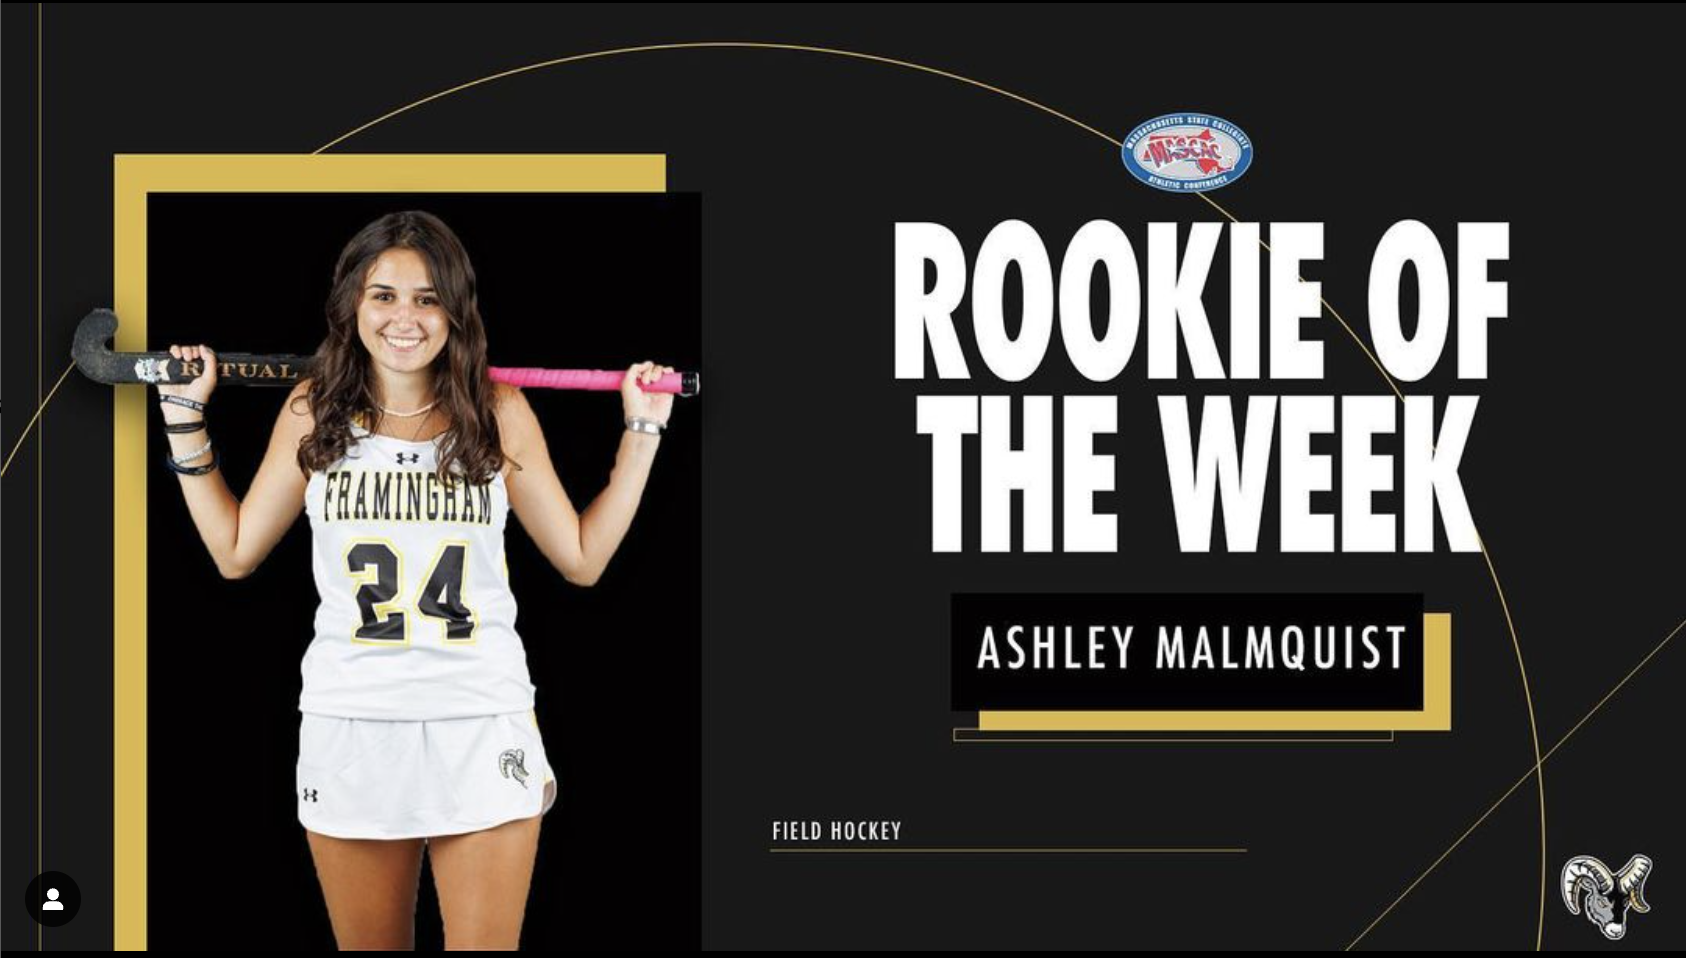 Malmquist Grabs MASCAC Field Hockey Offensive Player & Rookie of the Week Honors